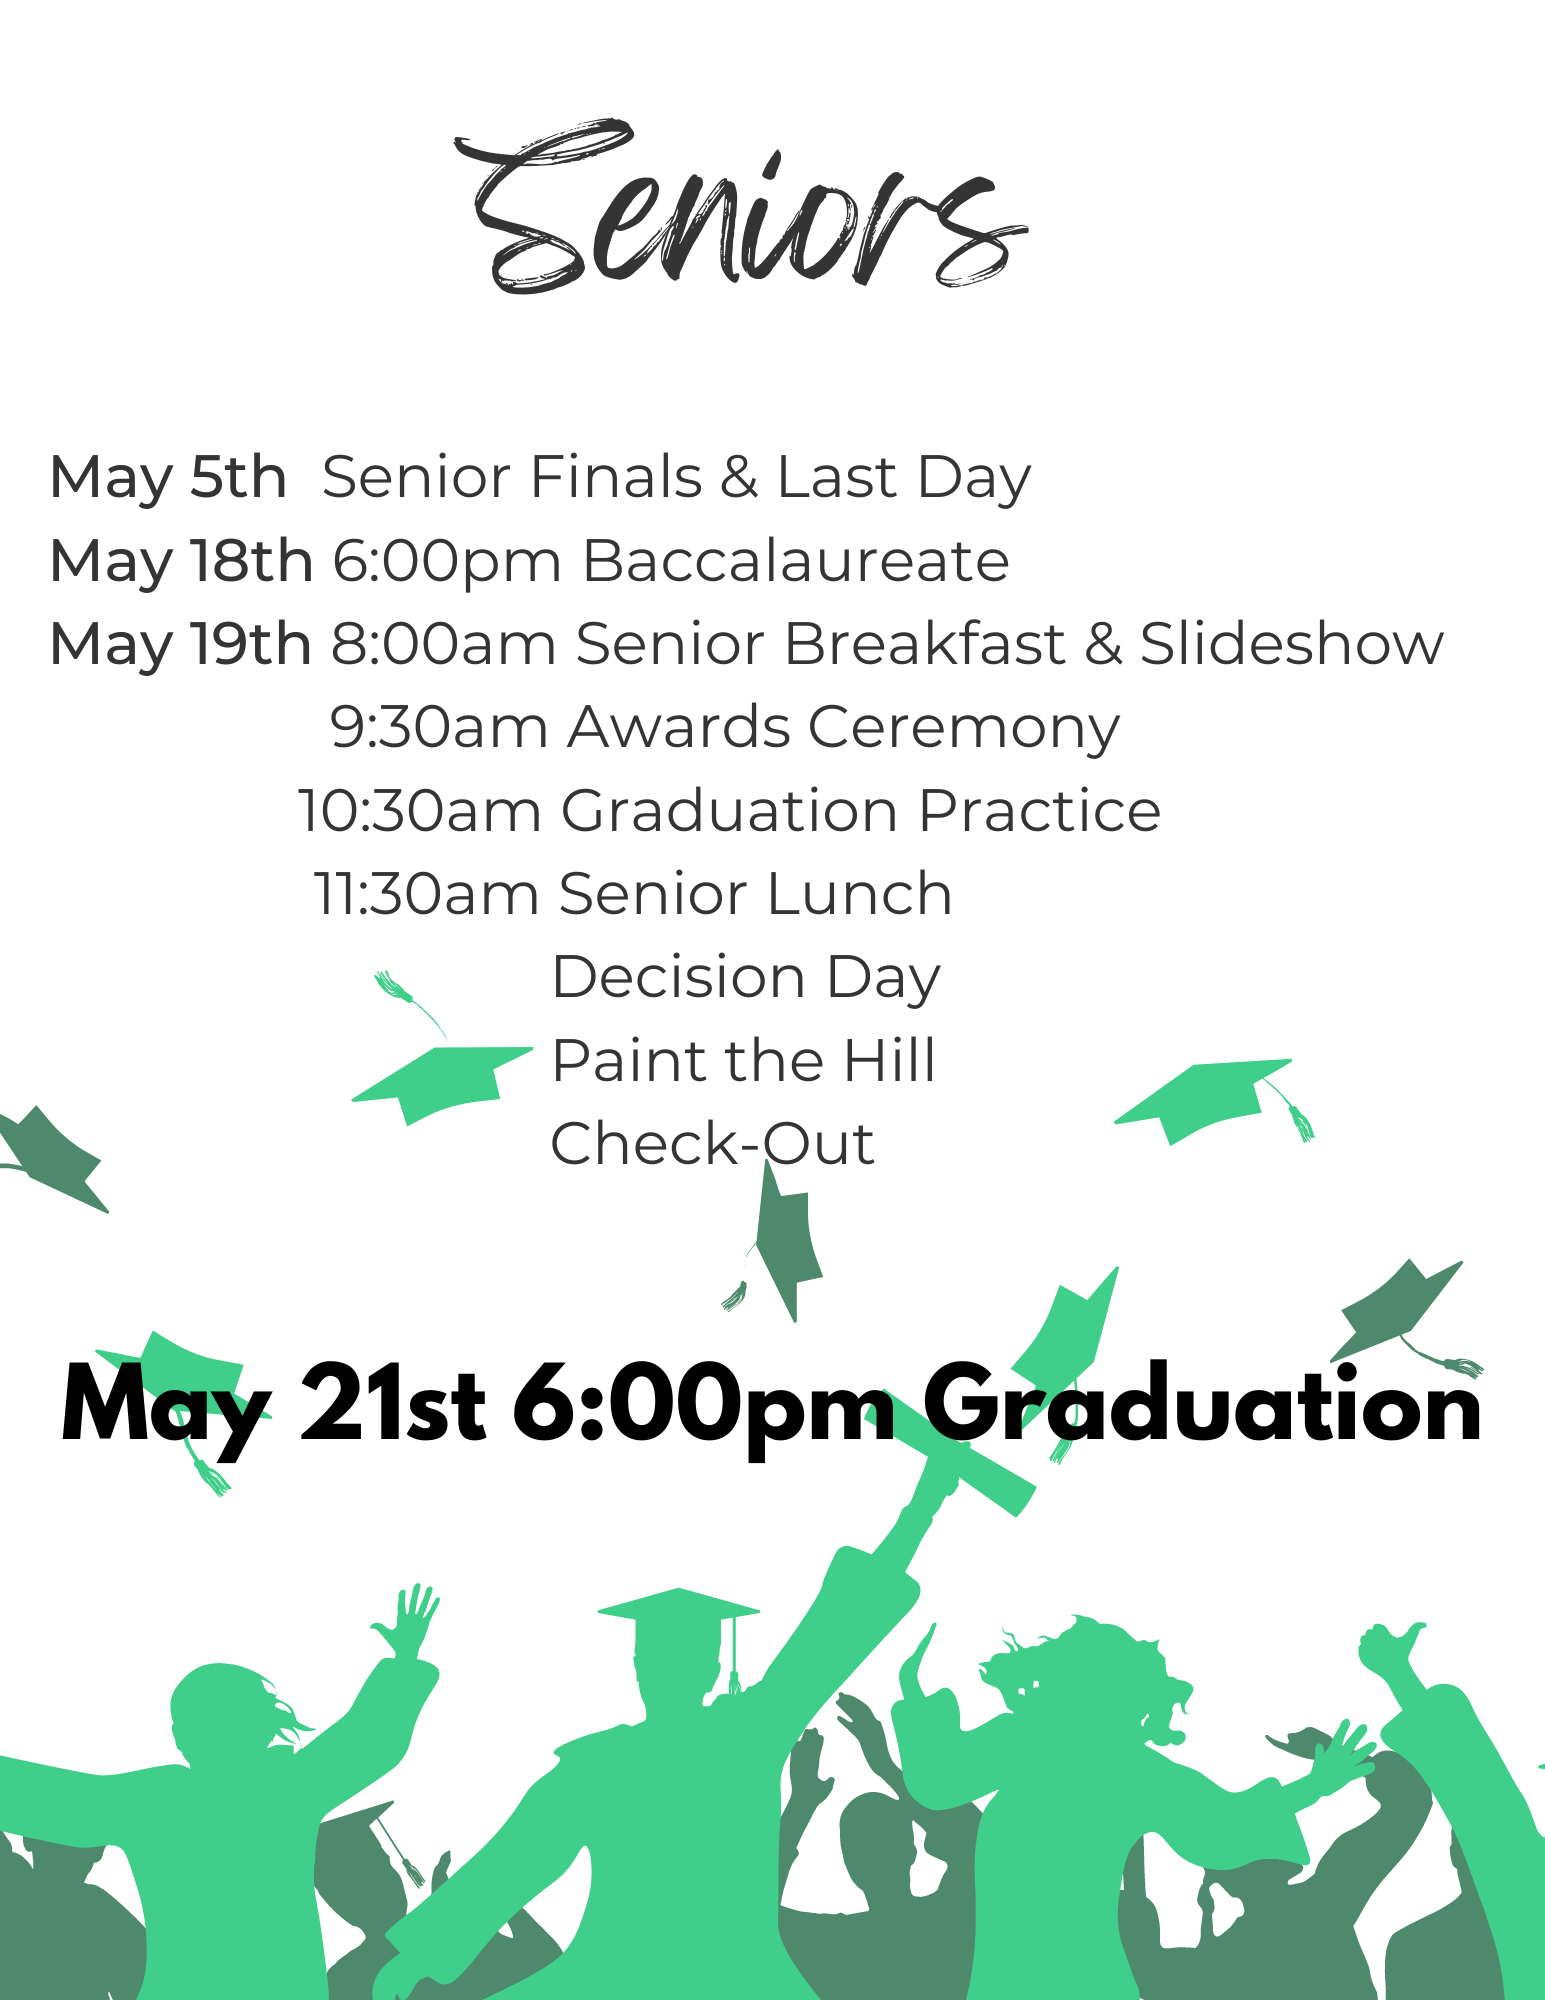 May 5th Finals & last day.  May 18th 6:00pm Baccalaureate.  May 19th 8:00am Senior breakfast and slideshow.  9:30am Awards ceremony. 10:30am Graduation practice. 11:30am Senior lunch, decision day, paint the hill, and check-out.  May 21st 6pm graduation.